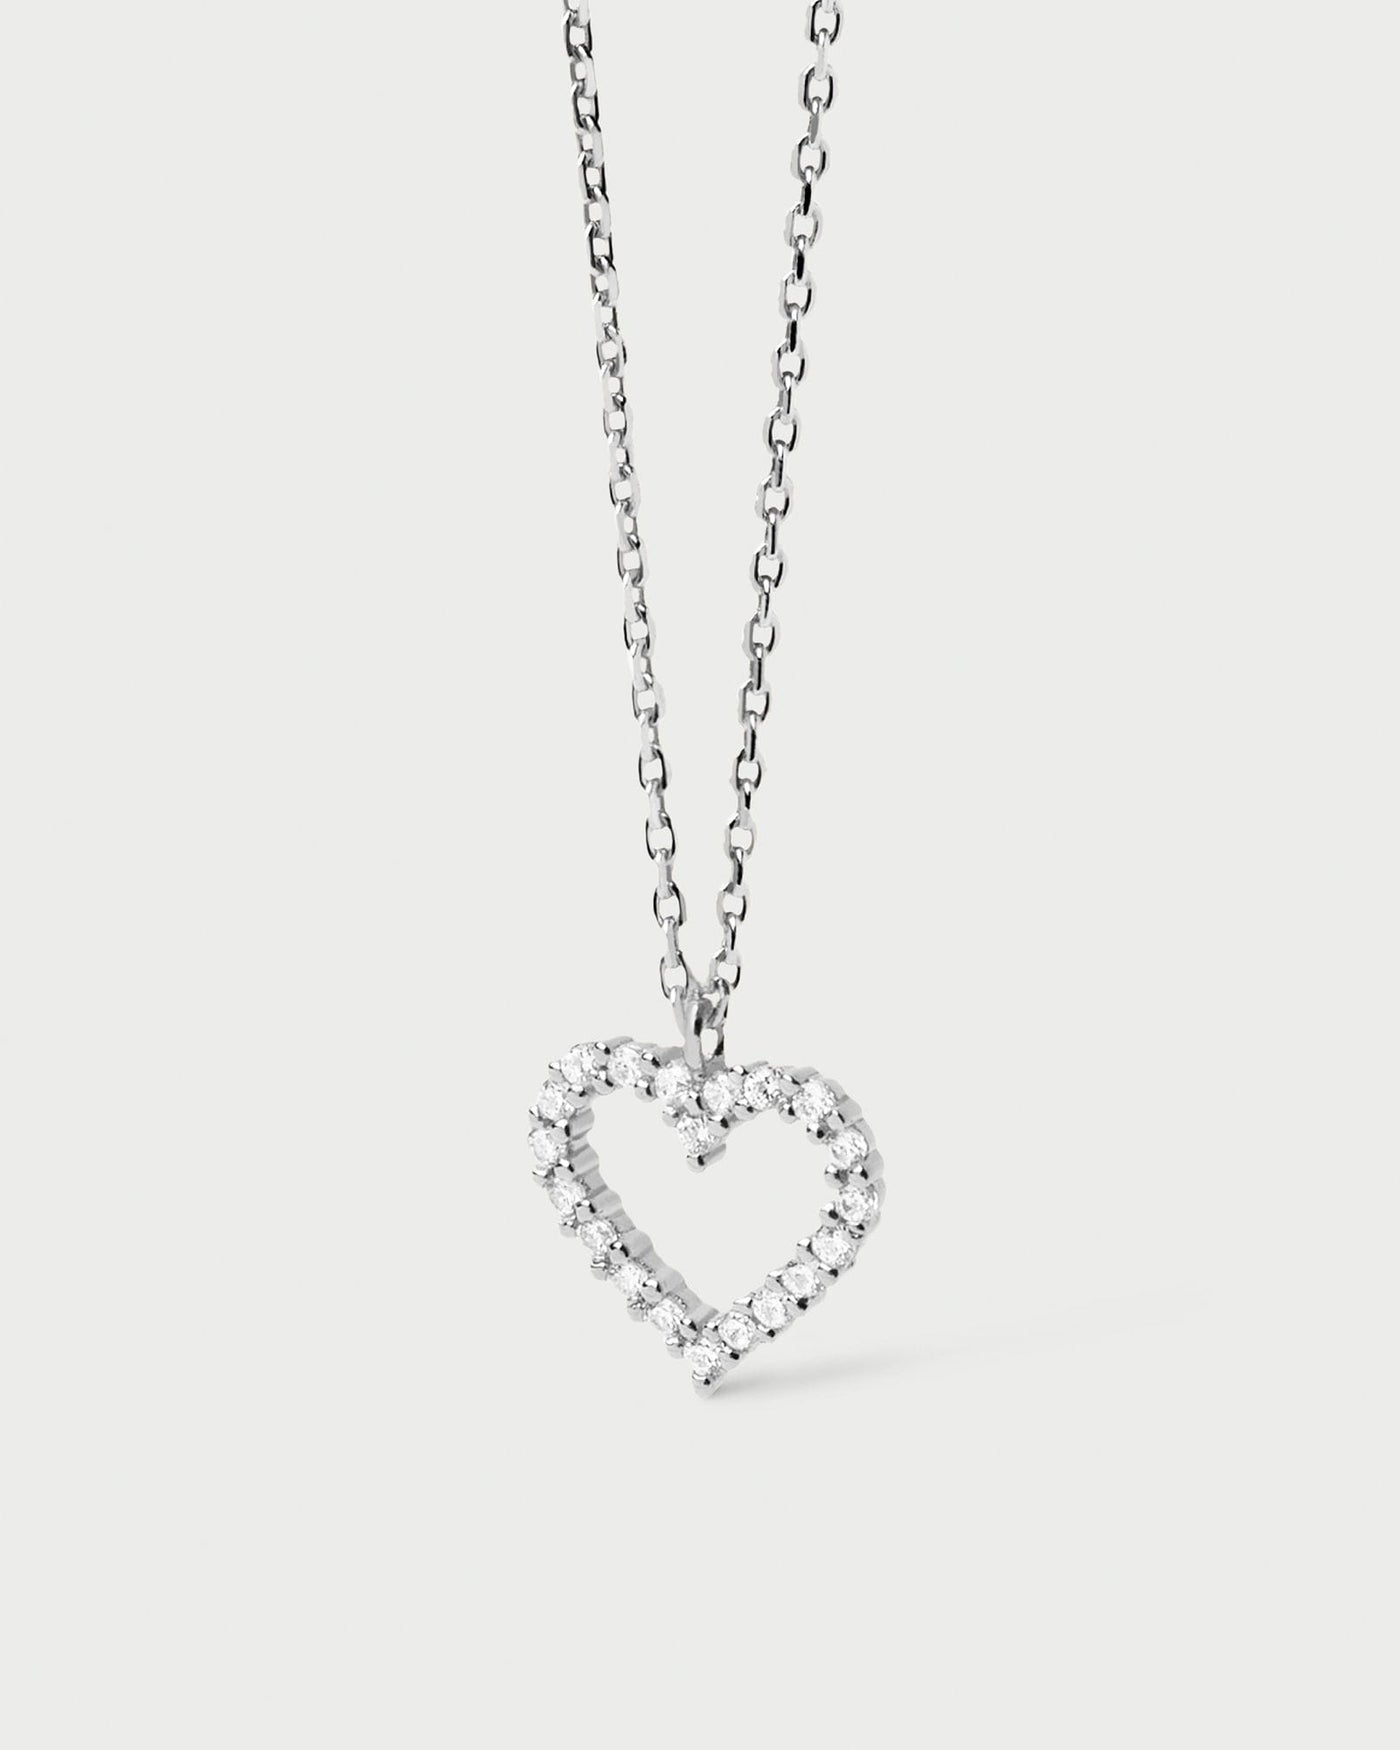 2024 Selection | White Heart Necklace Silver. Heart pendant set with white zirconia stones on a sterling single link chain necklace. Get the latest arrival from PDPAOLA. Place your order safely and get this Best Seller. Free Shipping.